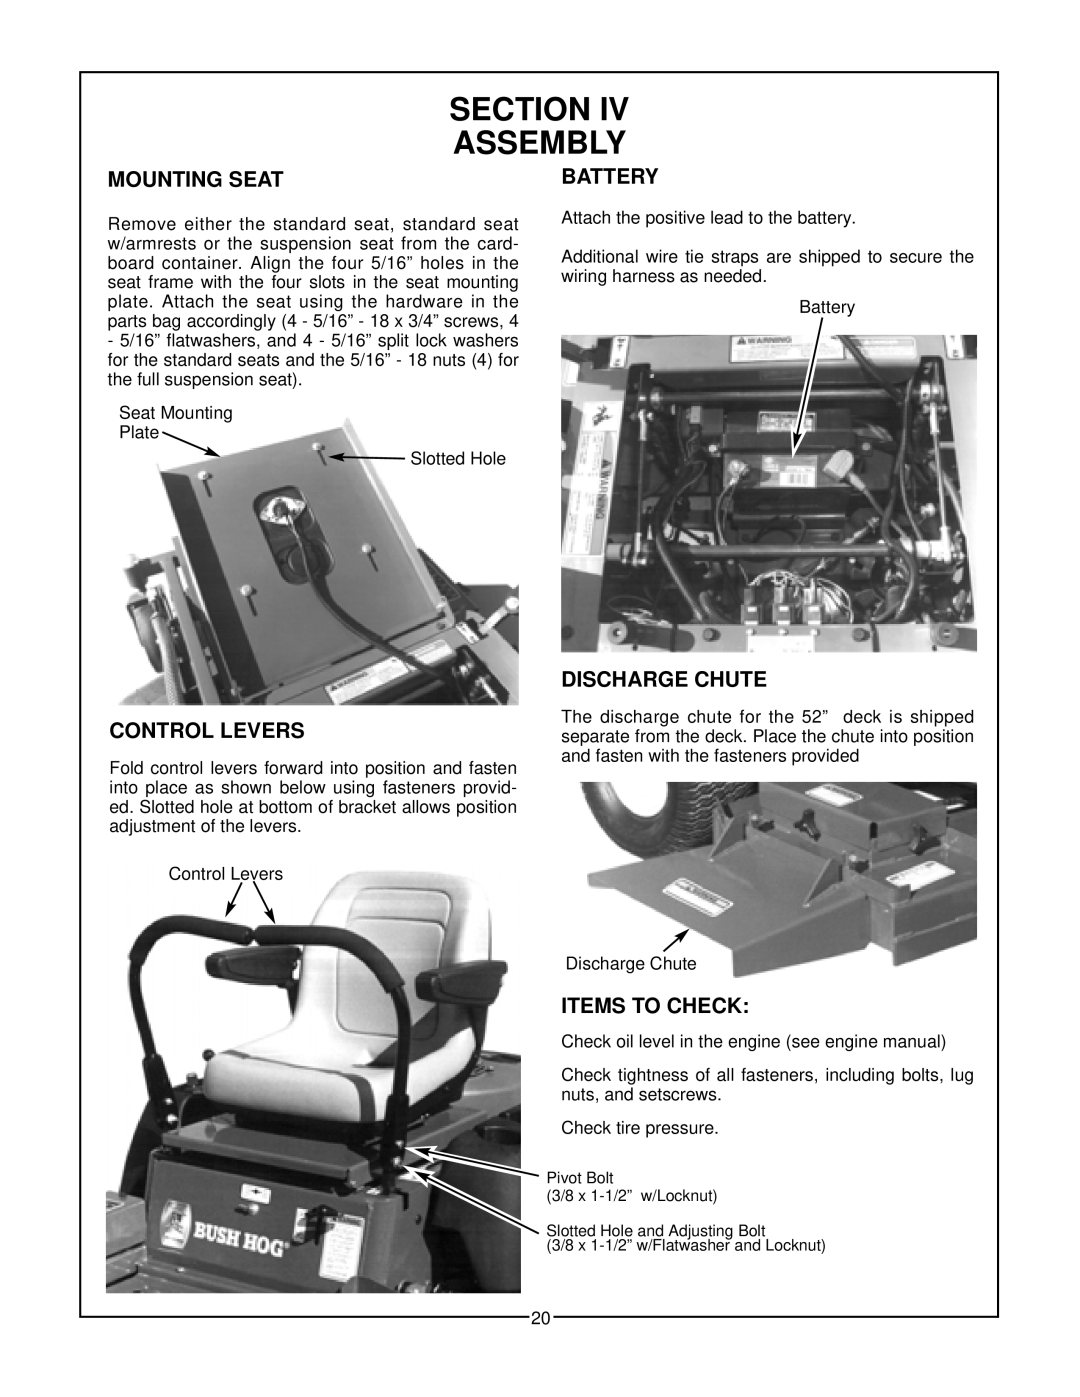 Bush Hog Estate Series manual Section Iv Assembly, Mounting Seat, Battery, Control Levers, Discharge Chute, Items To Check 